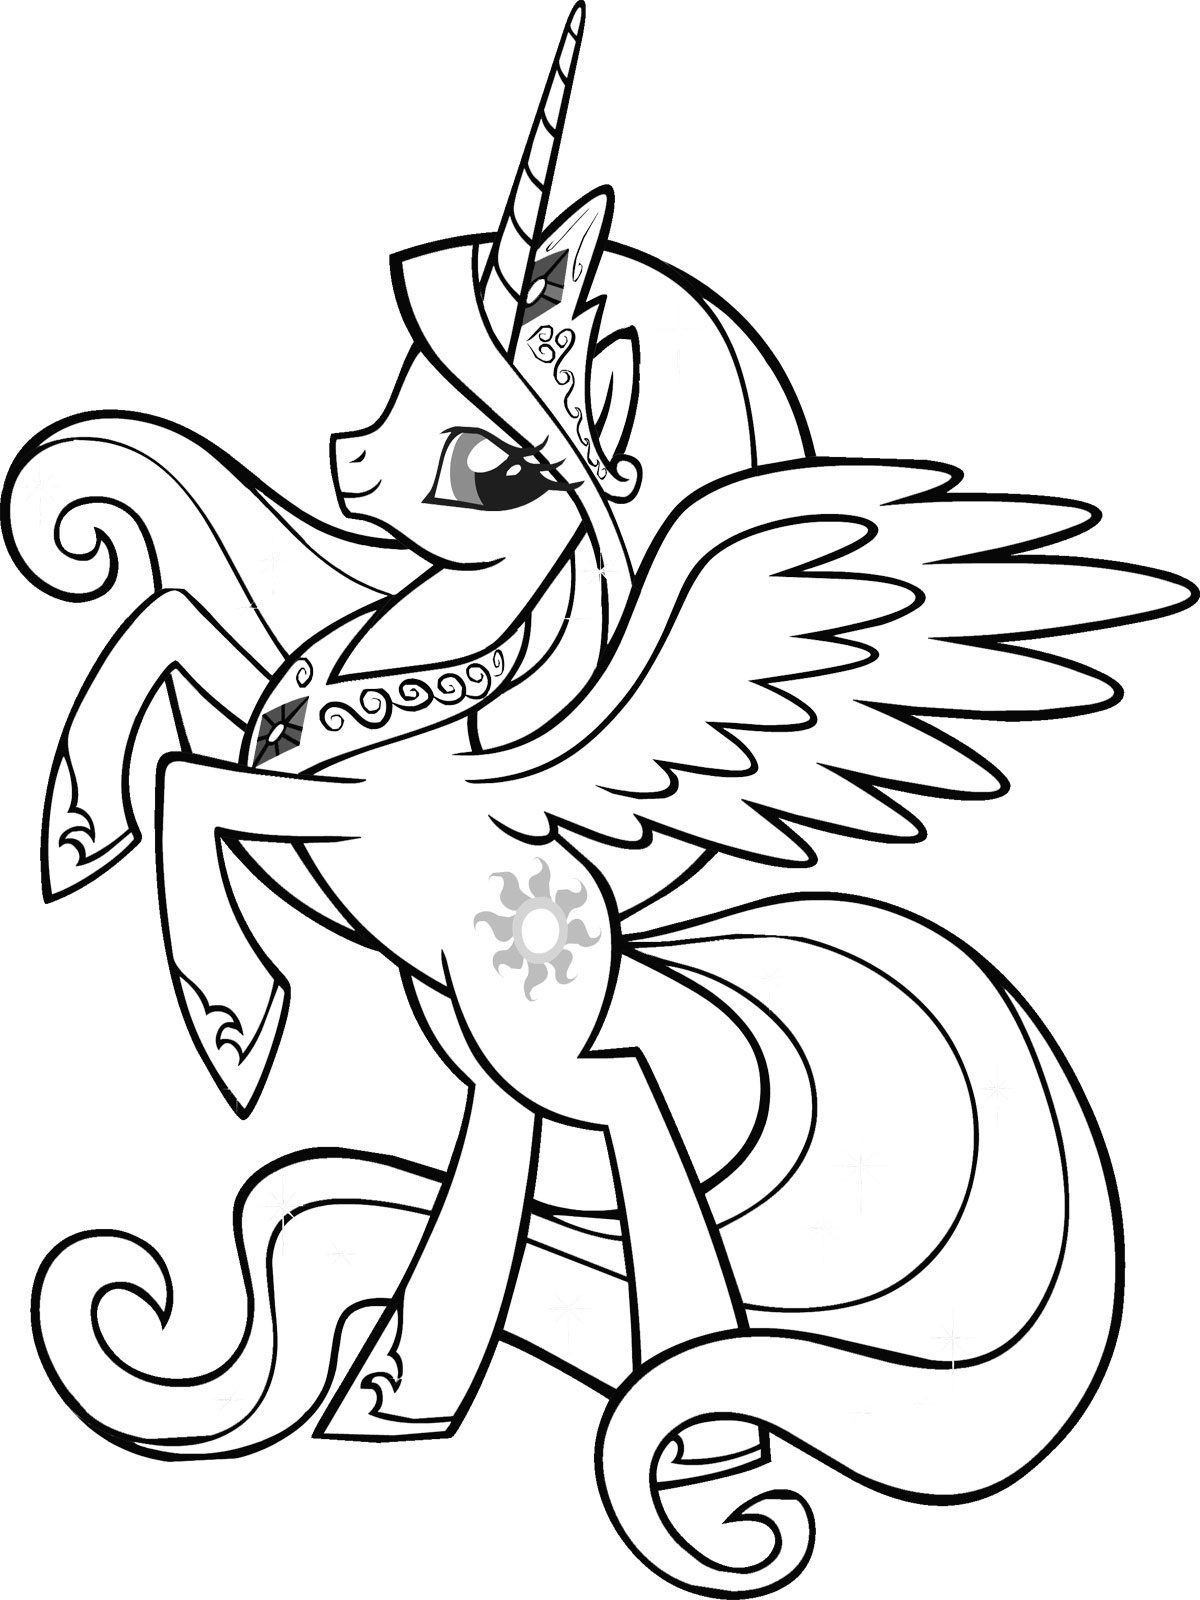 My Little Pony Coloring Pages Princess Luna at GetColorings.com | Free printable colorings pages ...